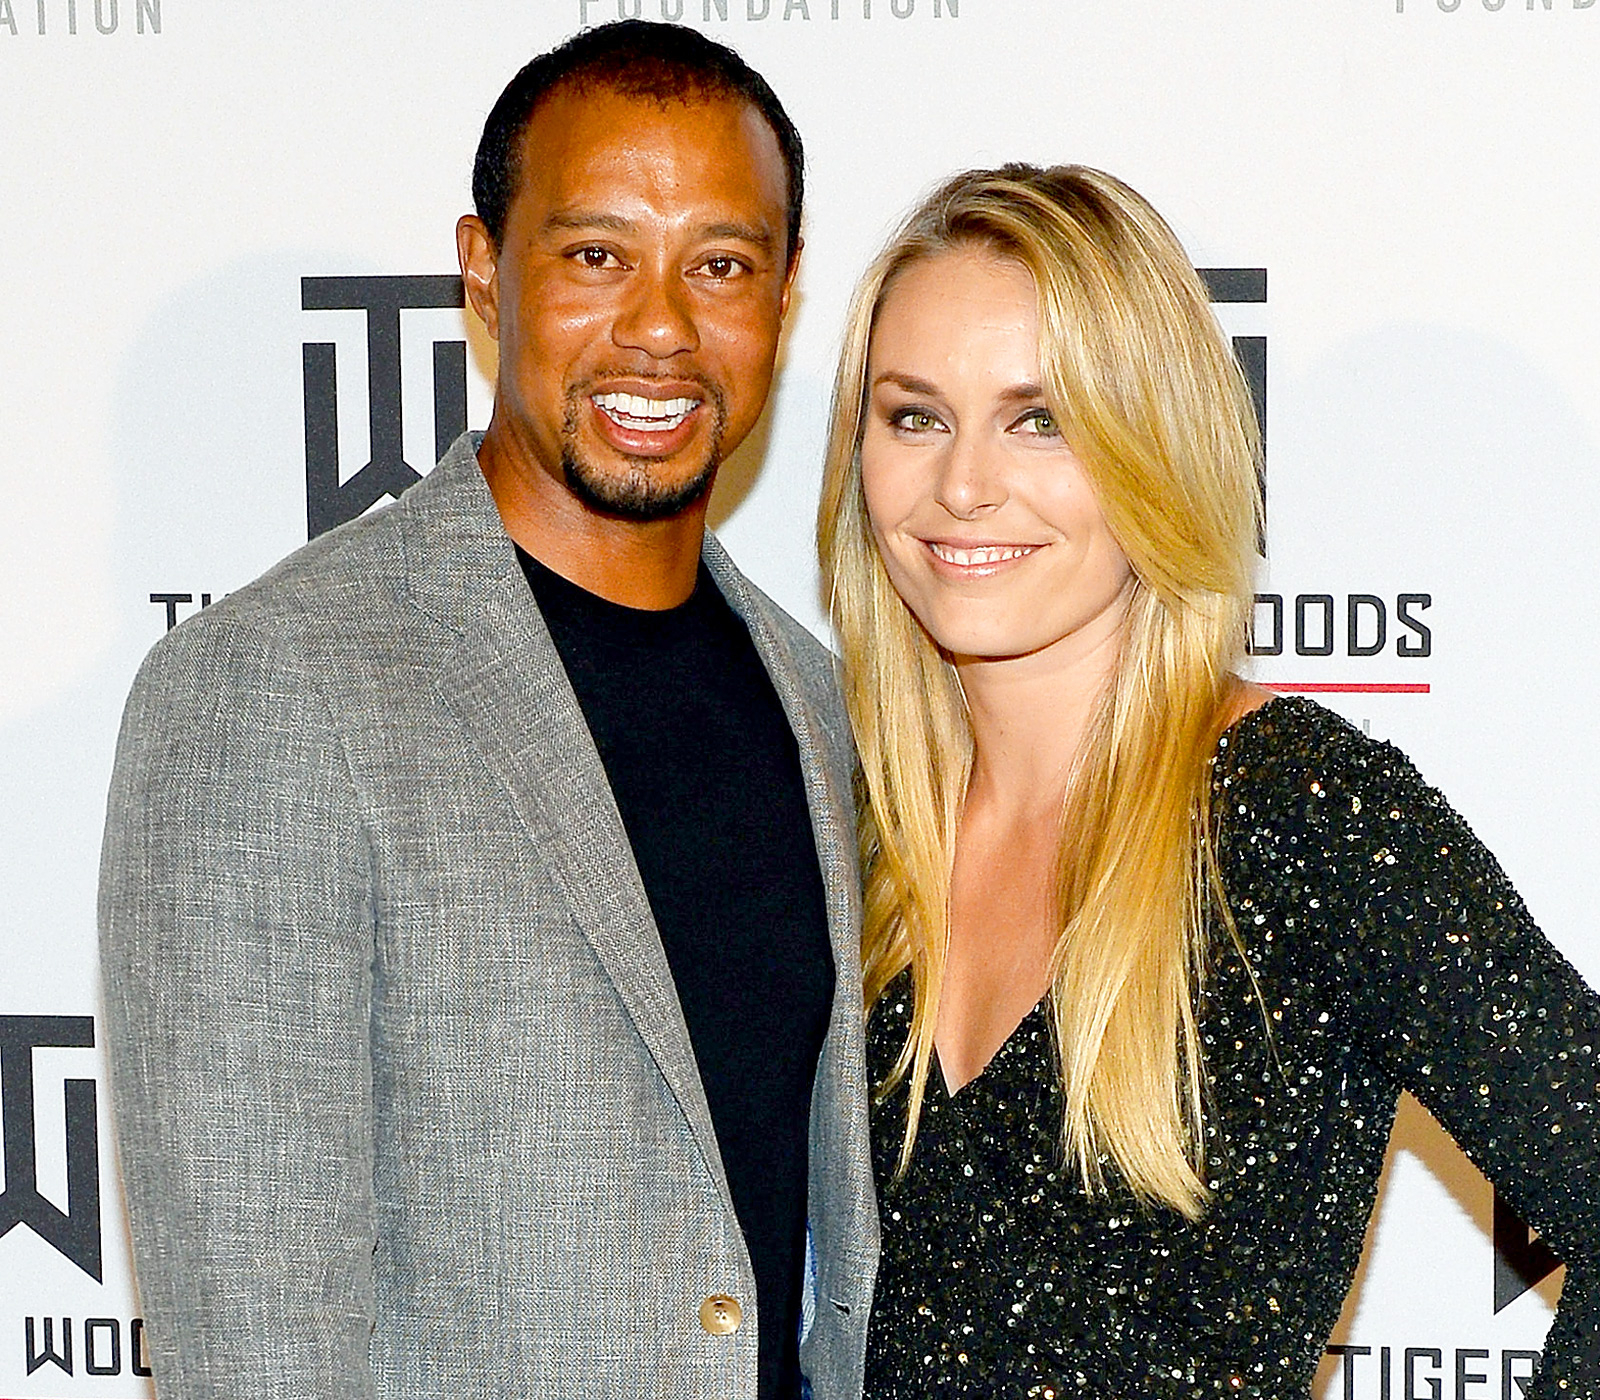 tiger woods nude wife photo